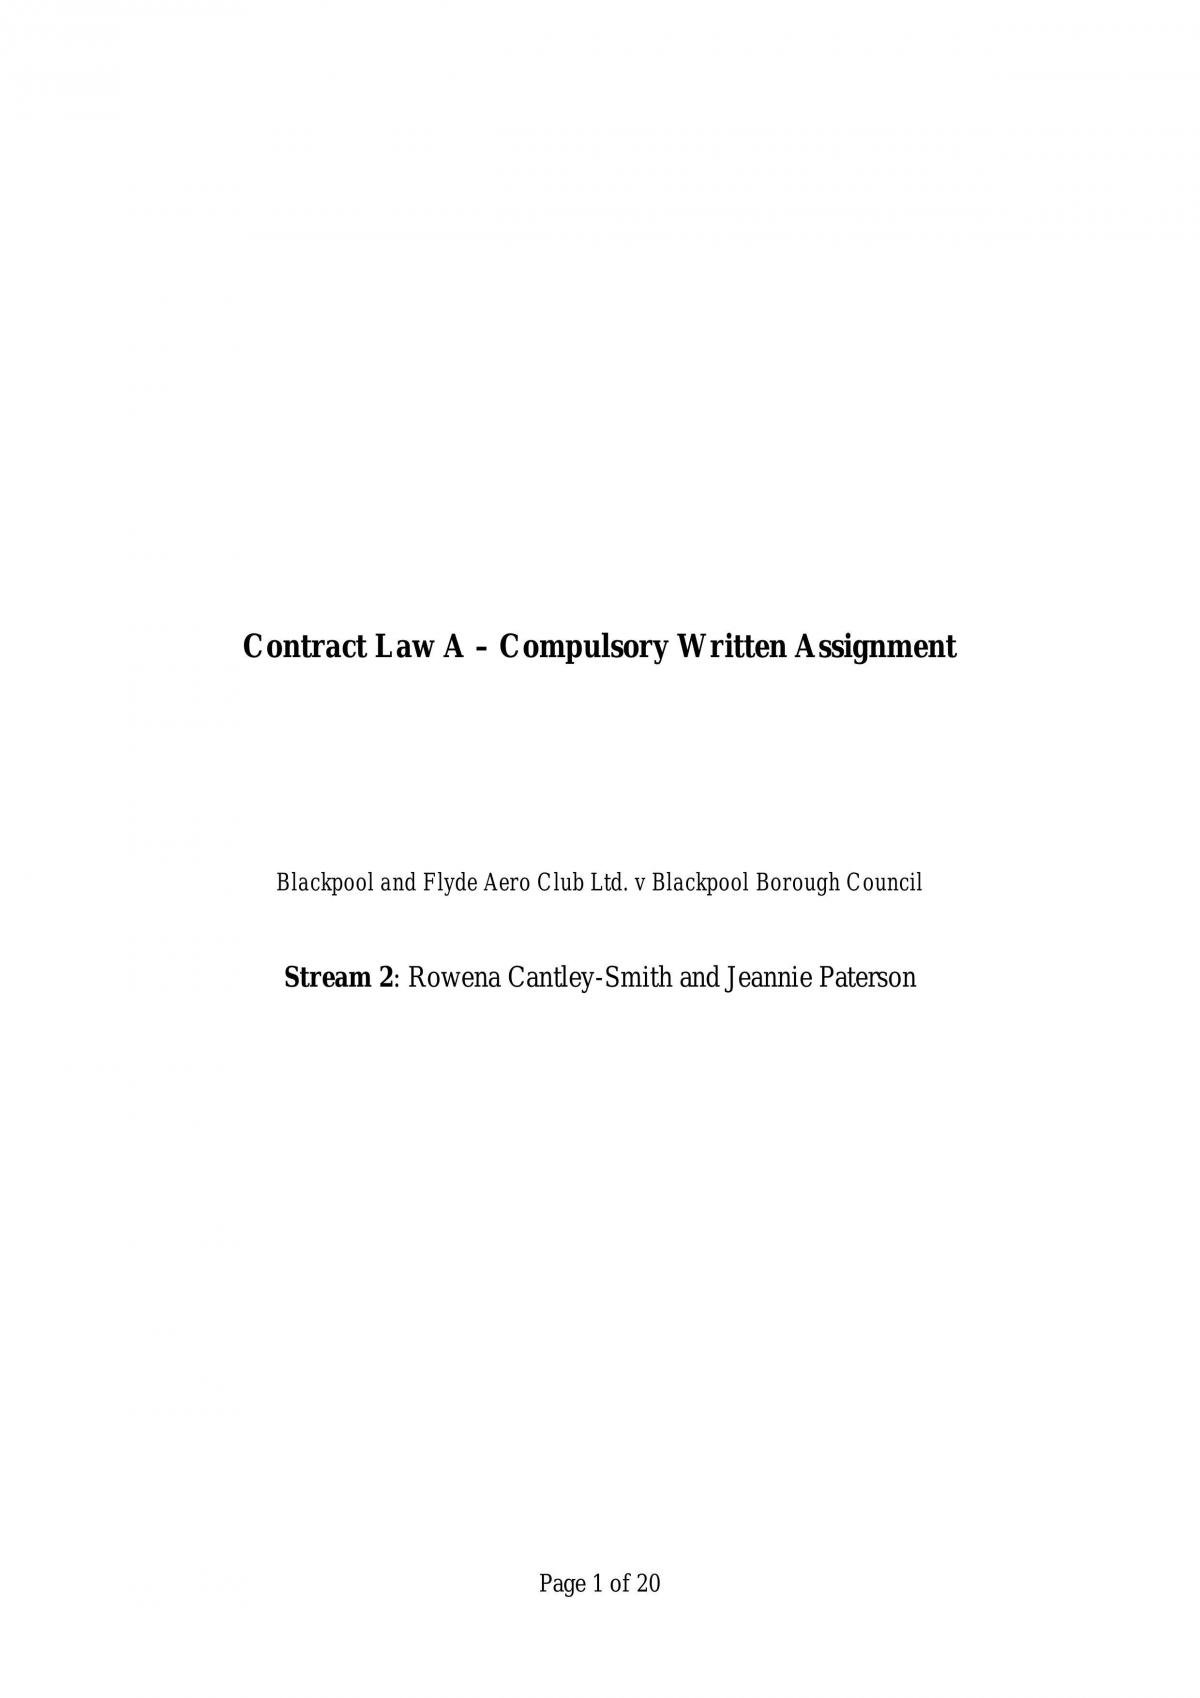 Contract Law A Case Study Assignment - Page 1